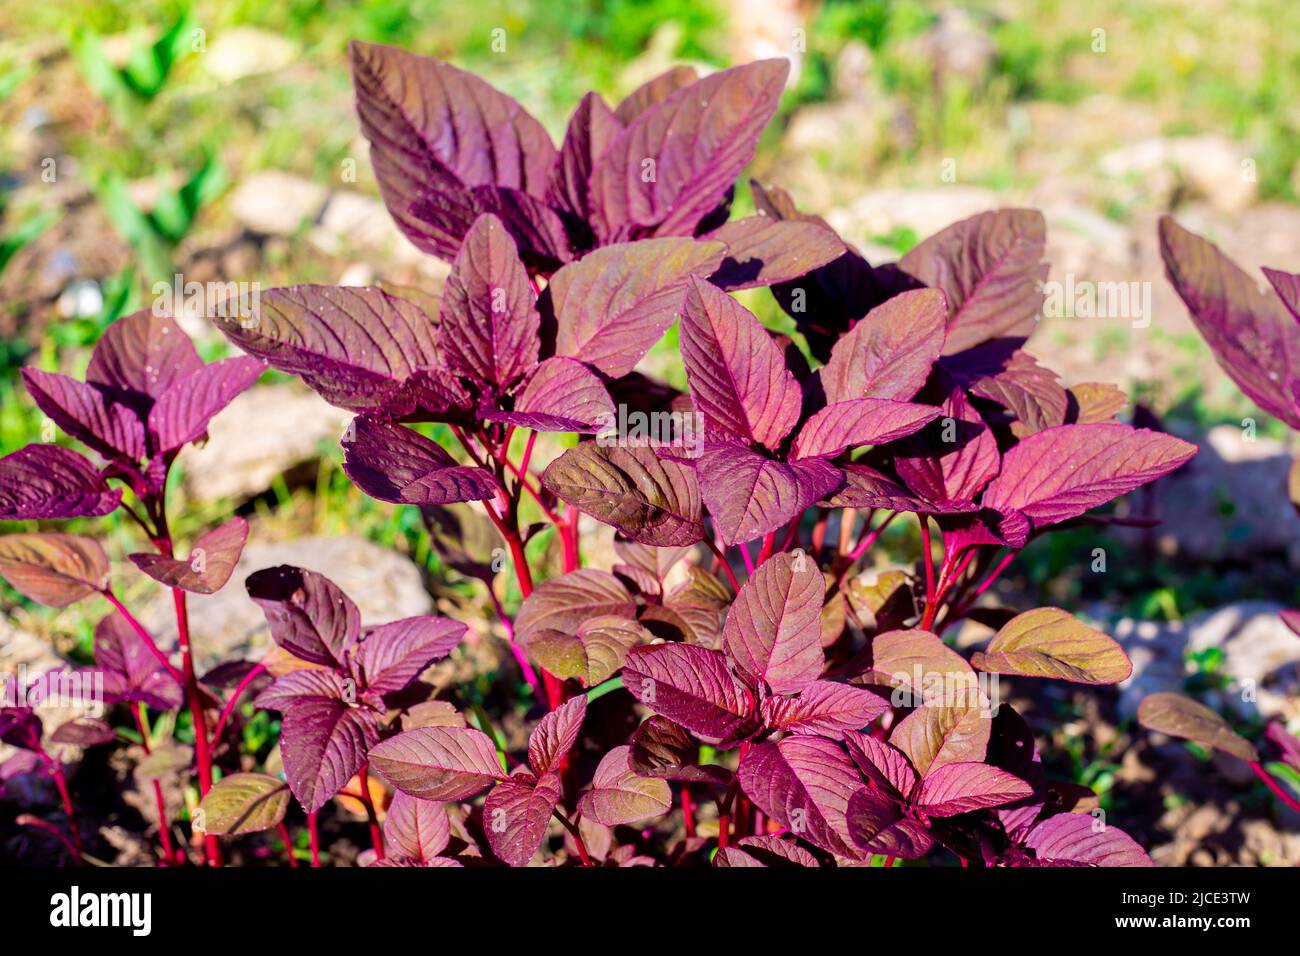 Beautiful purple flowers of vegetable amaranth grow in the garden. Stock Photo